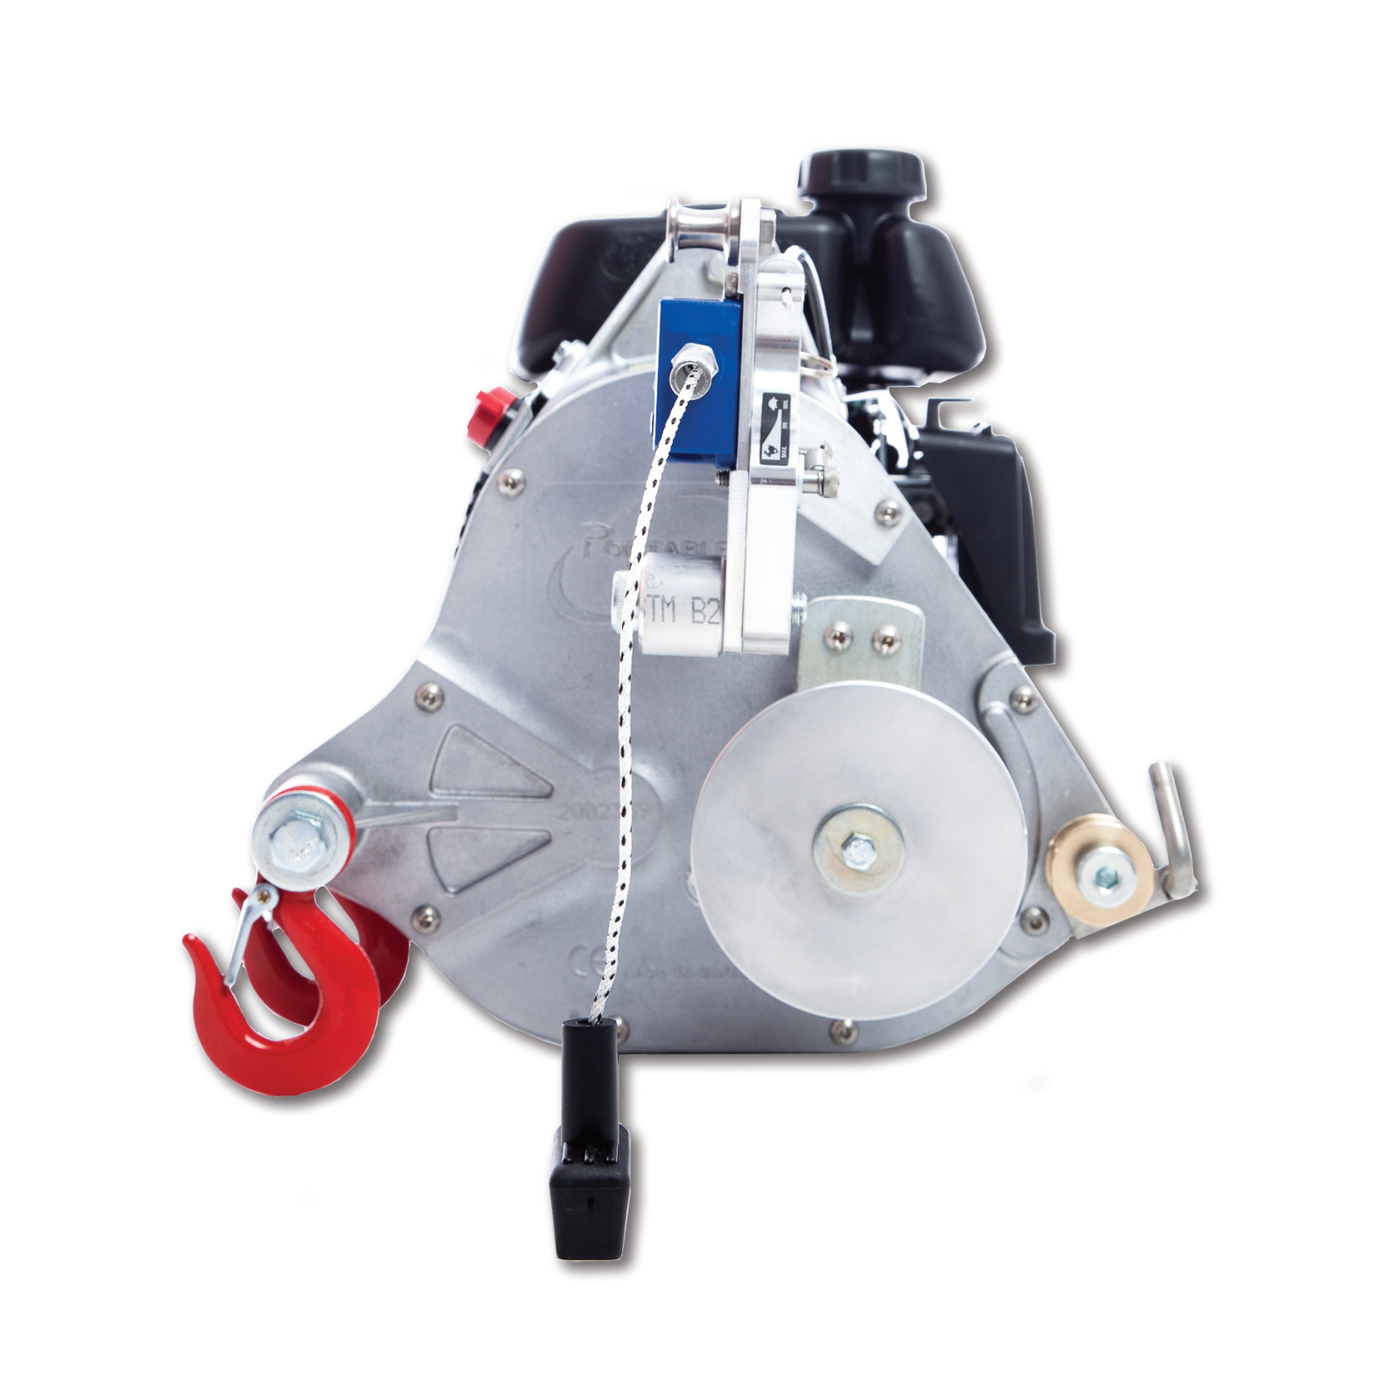 PCH1000 Gas-Powered Lifting Winch